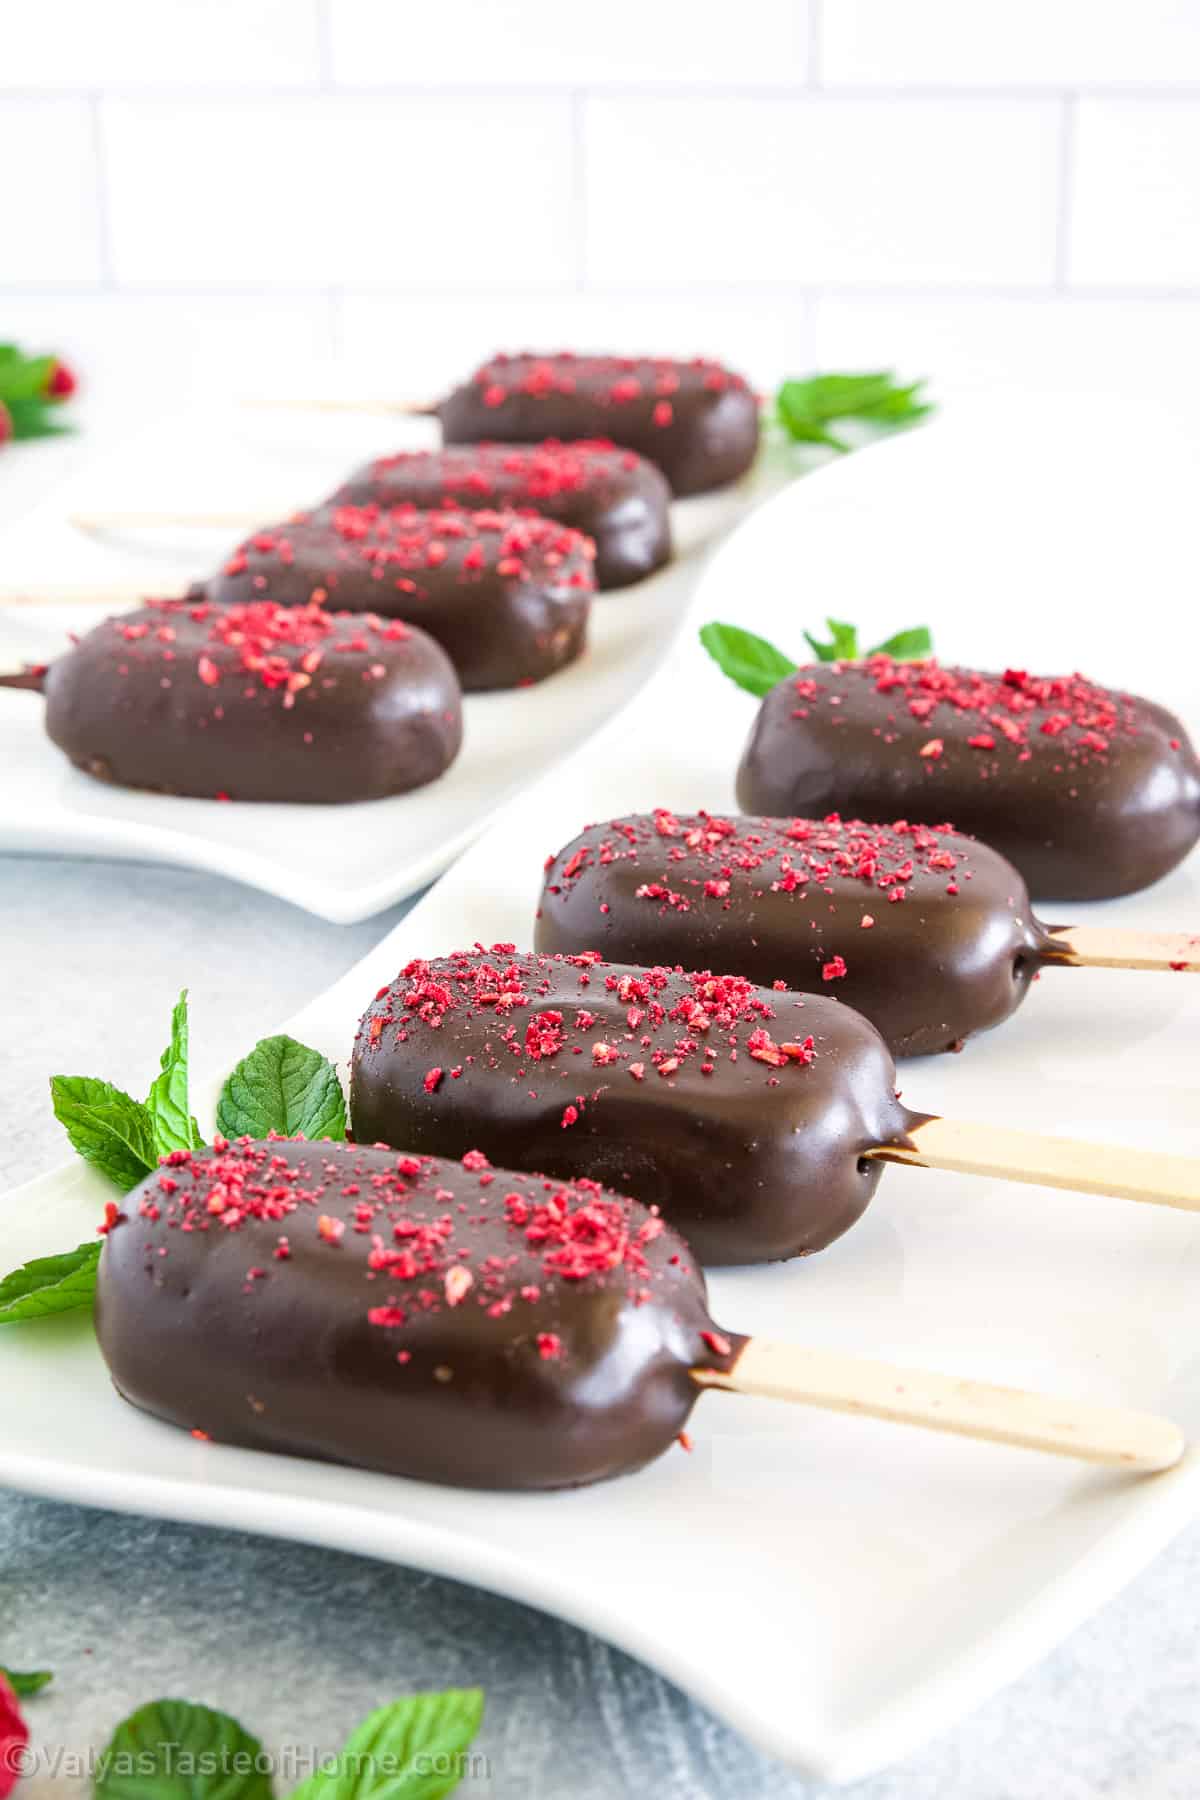 With their appealing popsicle-like shape and smooth chocolate coating, these cakesicles are not only visually appealing but also a joy to have! 